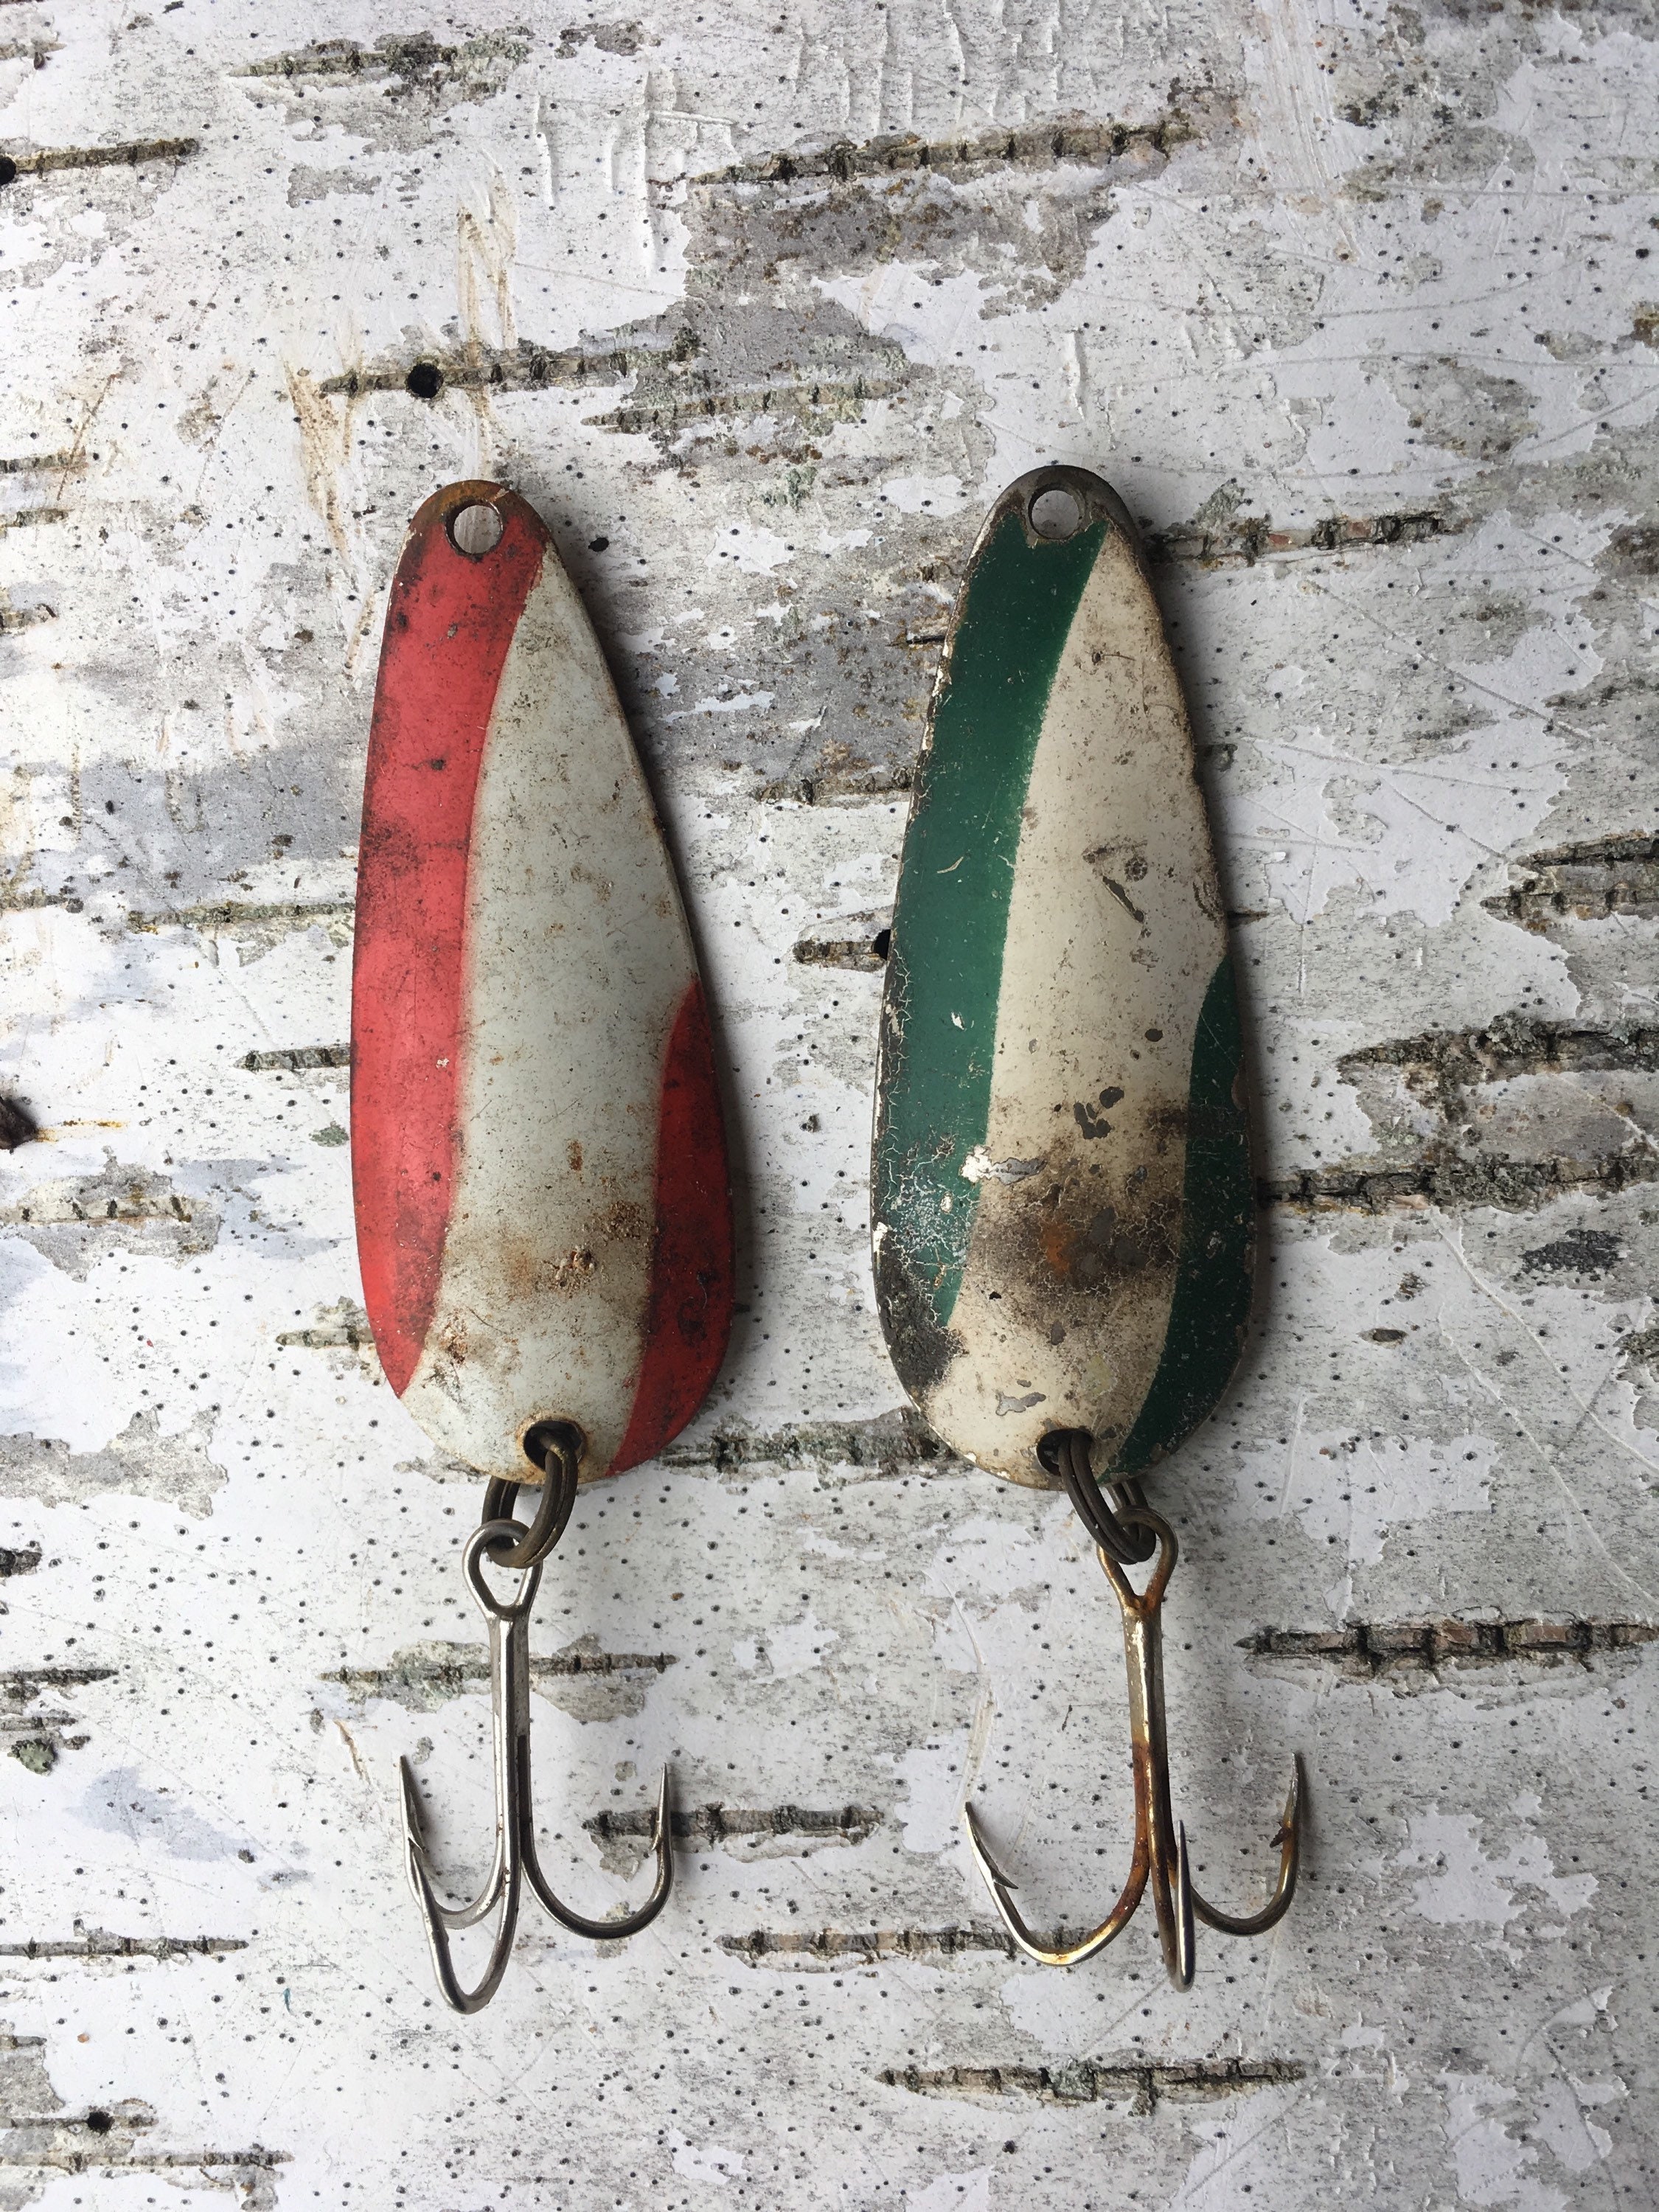 Collection of 8 Vintage Spoon Daredevil-like Lures -  Denmark